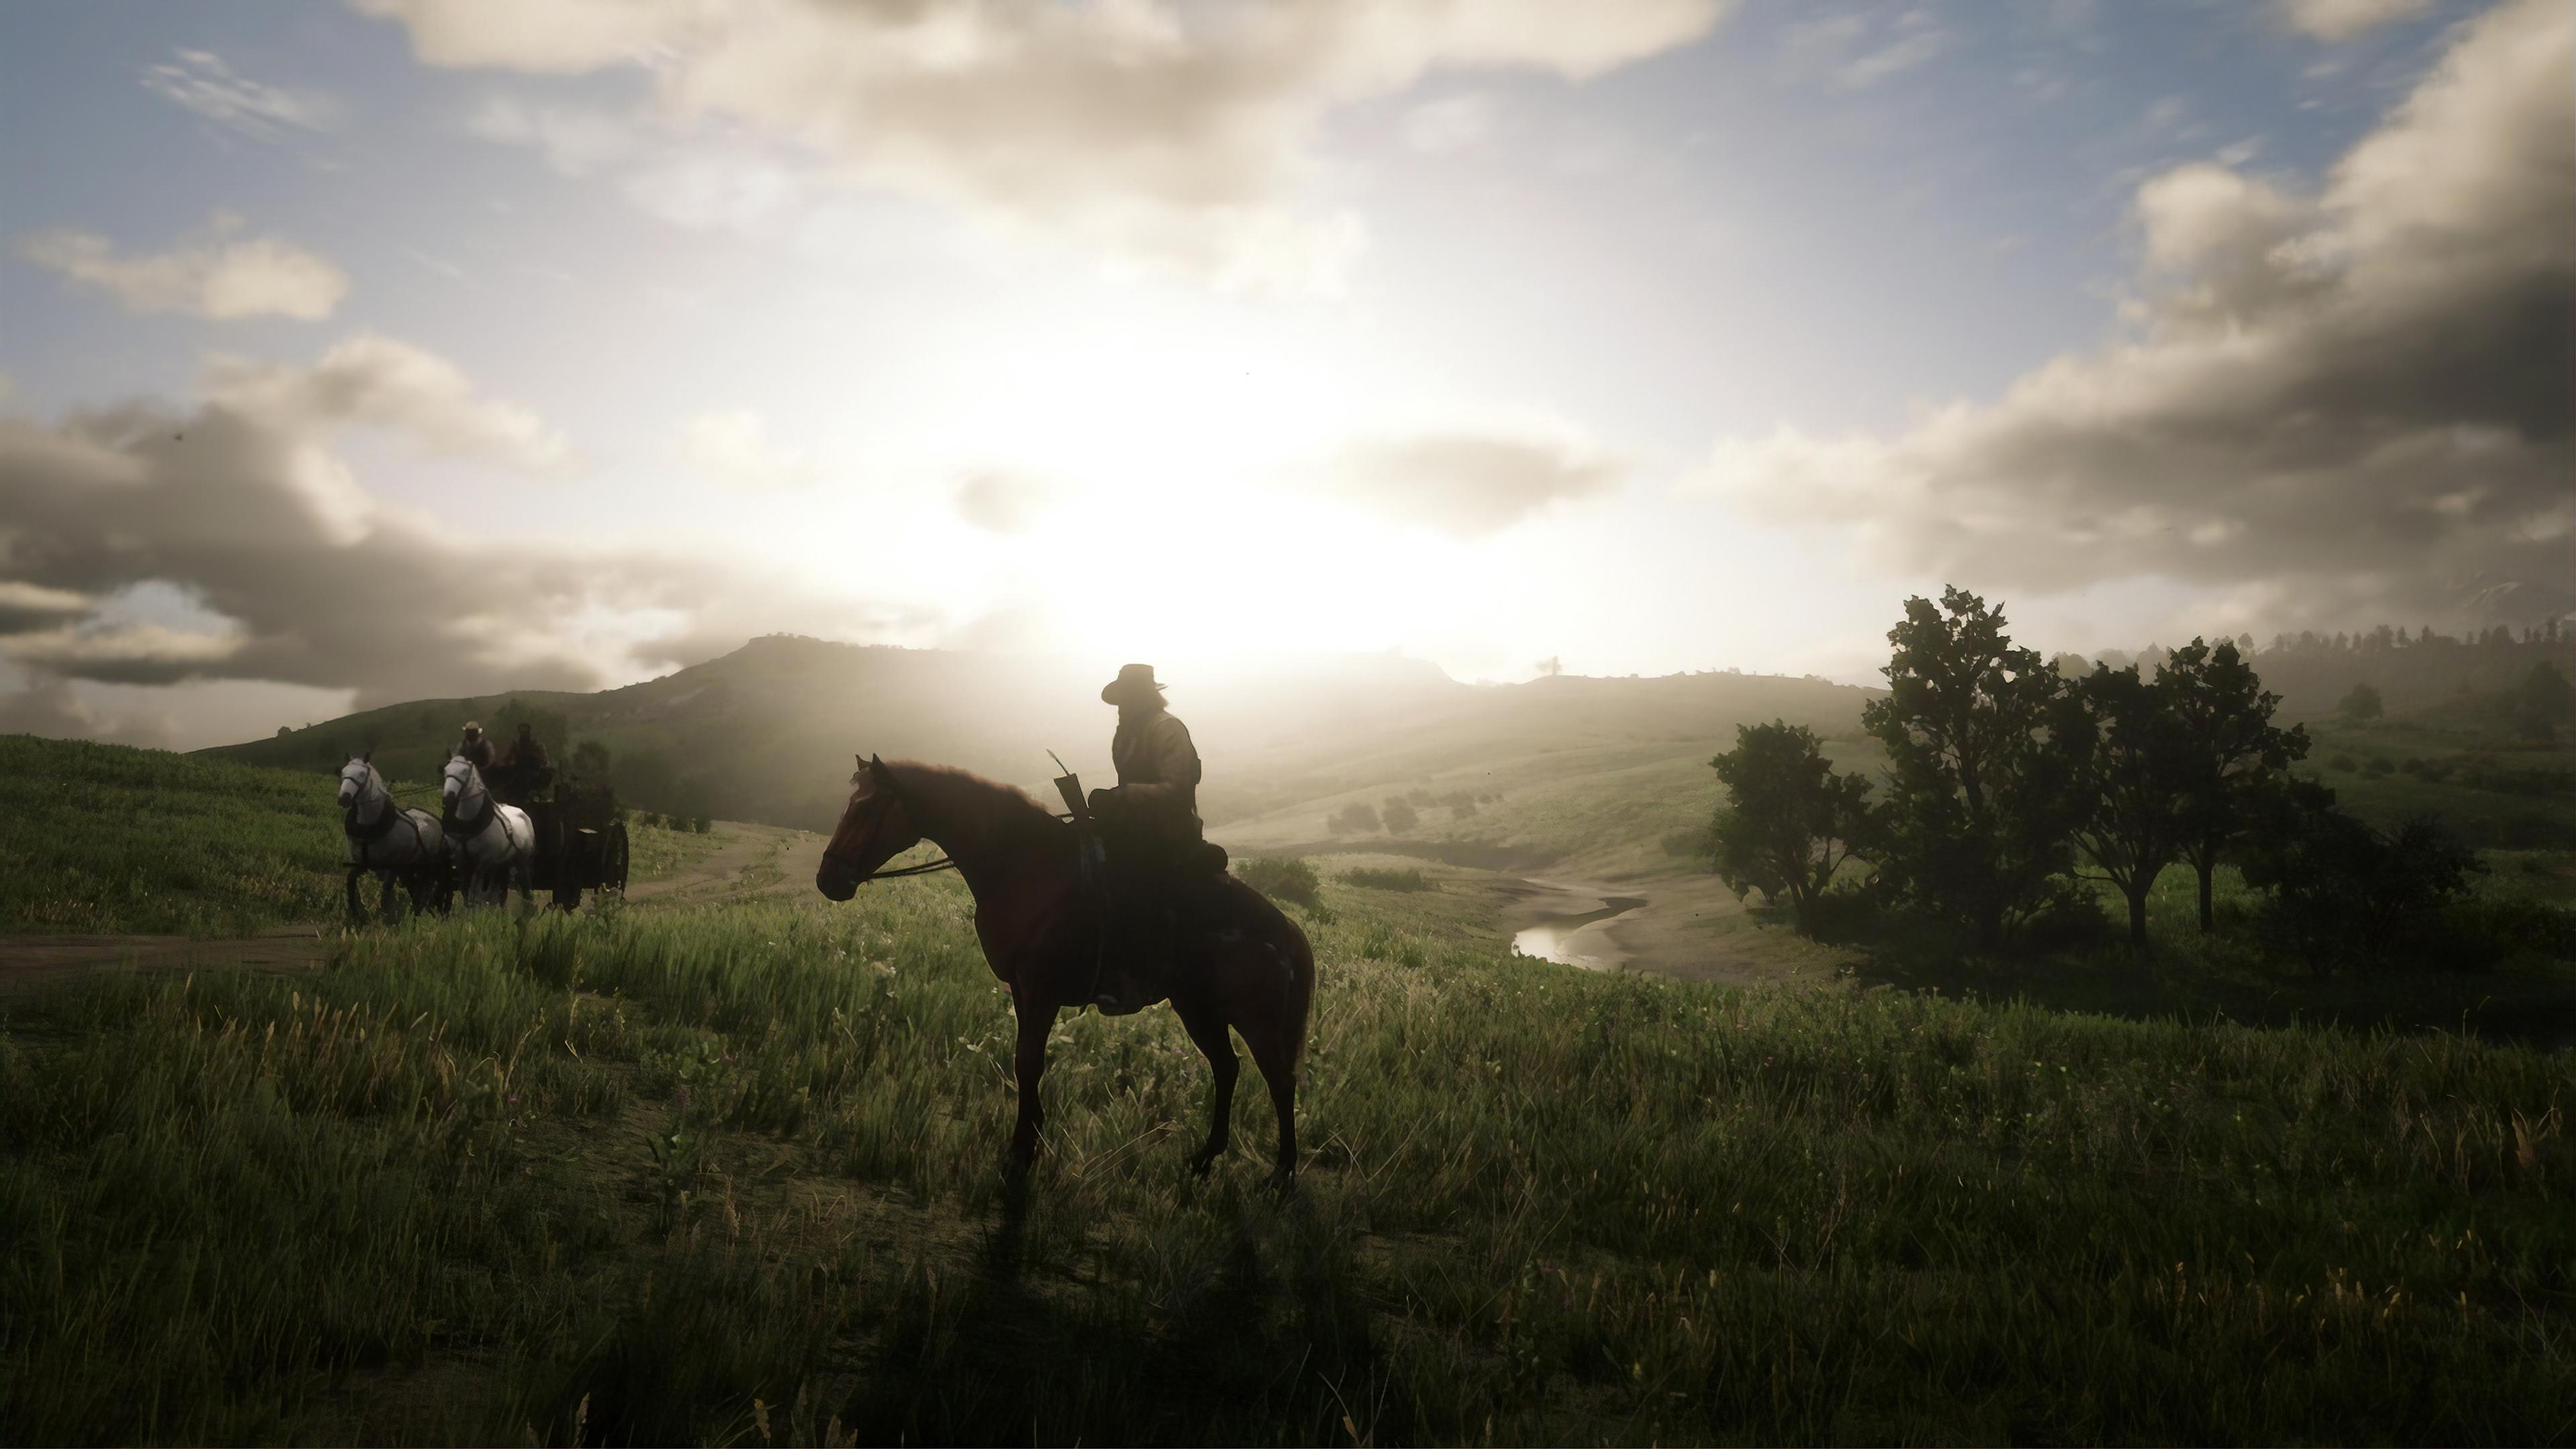 Video Game Red Dead Redemption 2 4k Ultra HD Wallpaper by NoviKaiba23